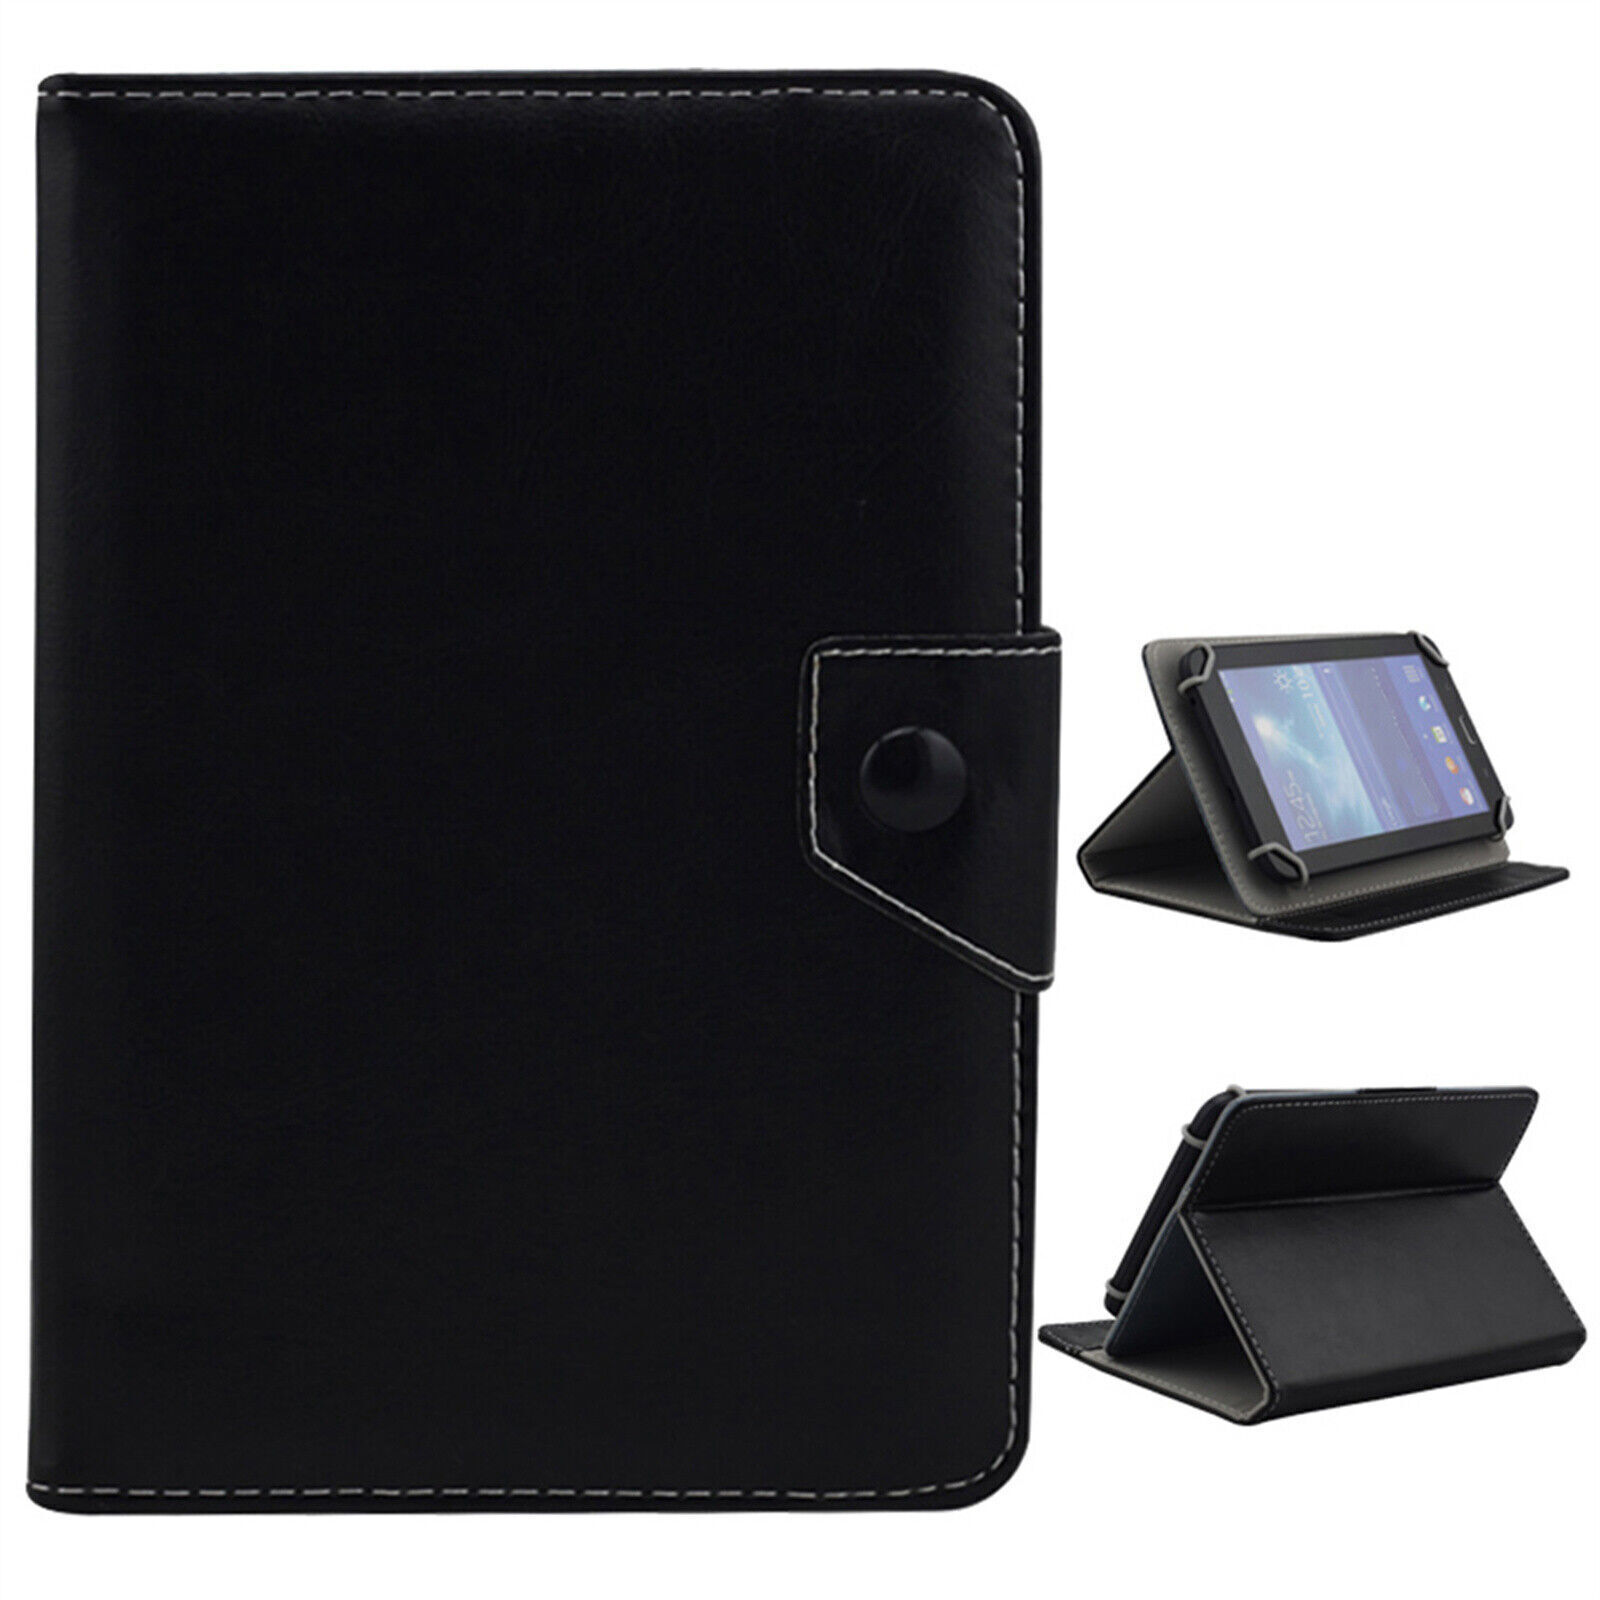 Universal Folding Folio Case Stand Cover For Lenovo Tab 7